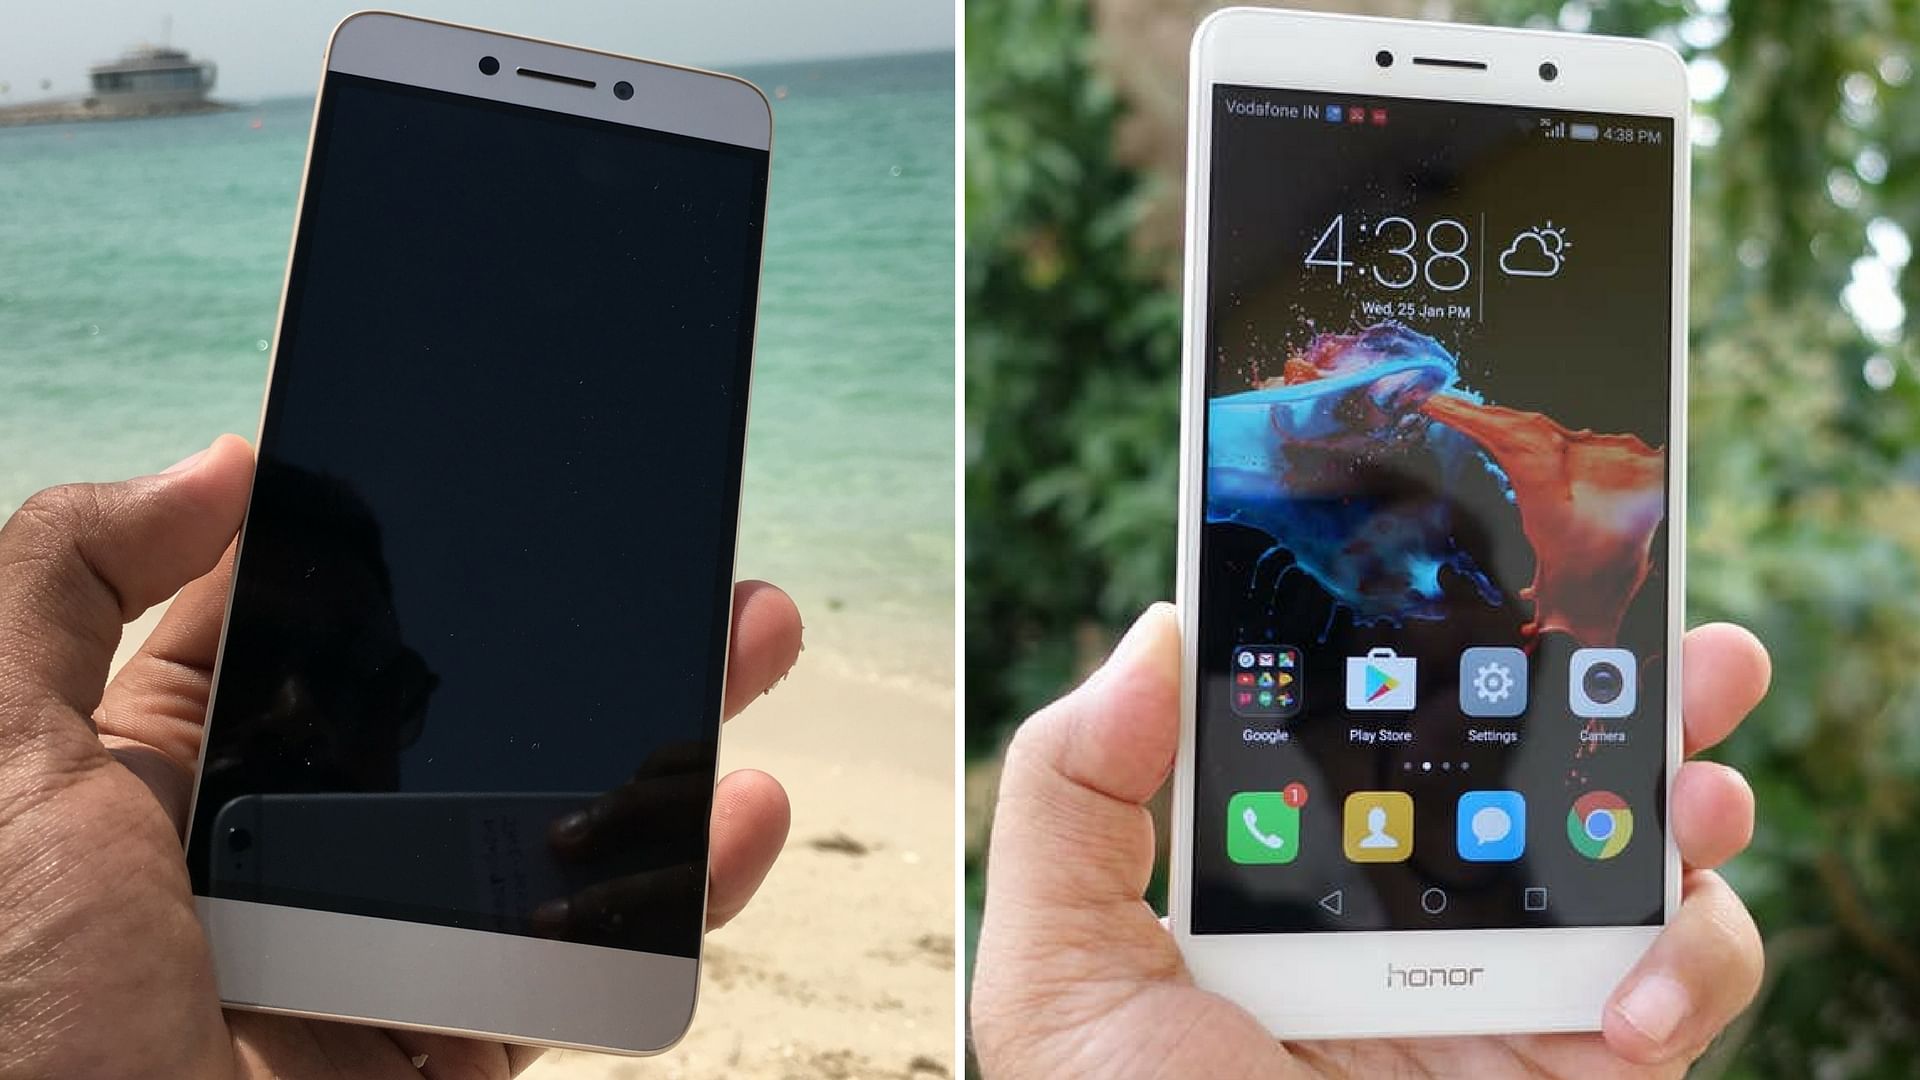 Both Coolpad Cool Play 6 (left) and Honor 6x (right) sport dual-camera